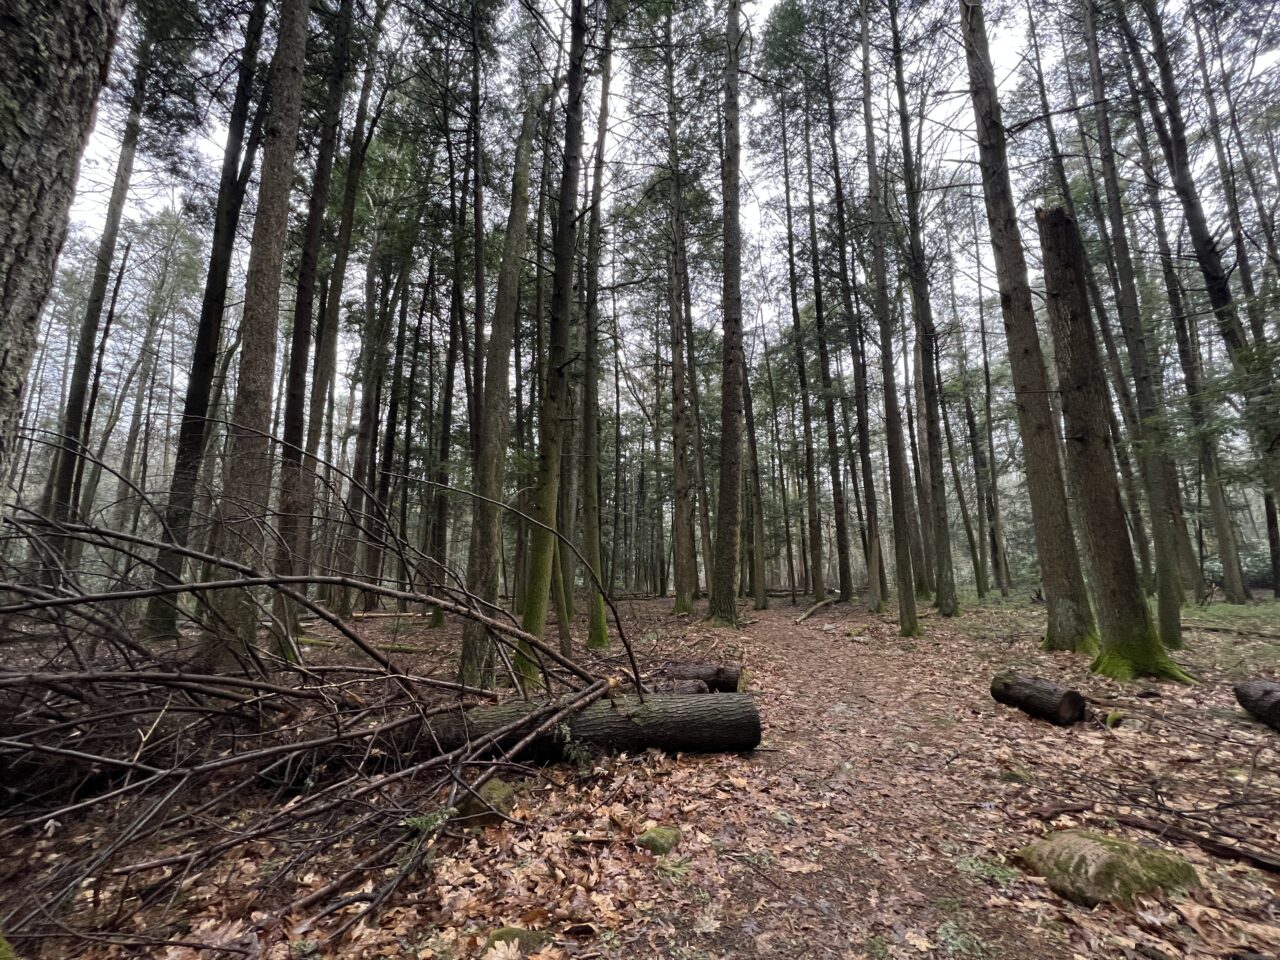 One of Pennsylvania's most damaged areas of hemlocks are in the Alan Seeger Natural Area in Rothrock State Forest in Huntingdon County.